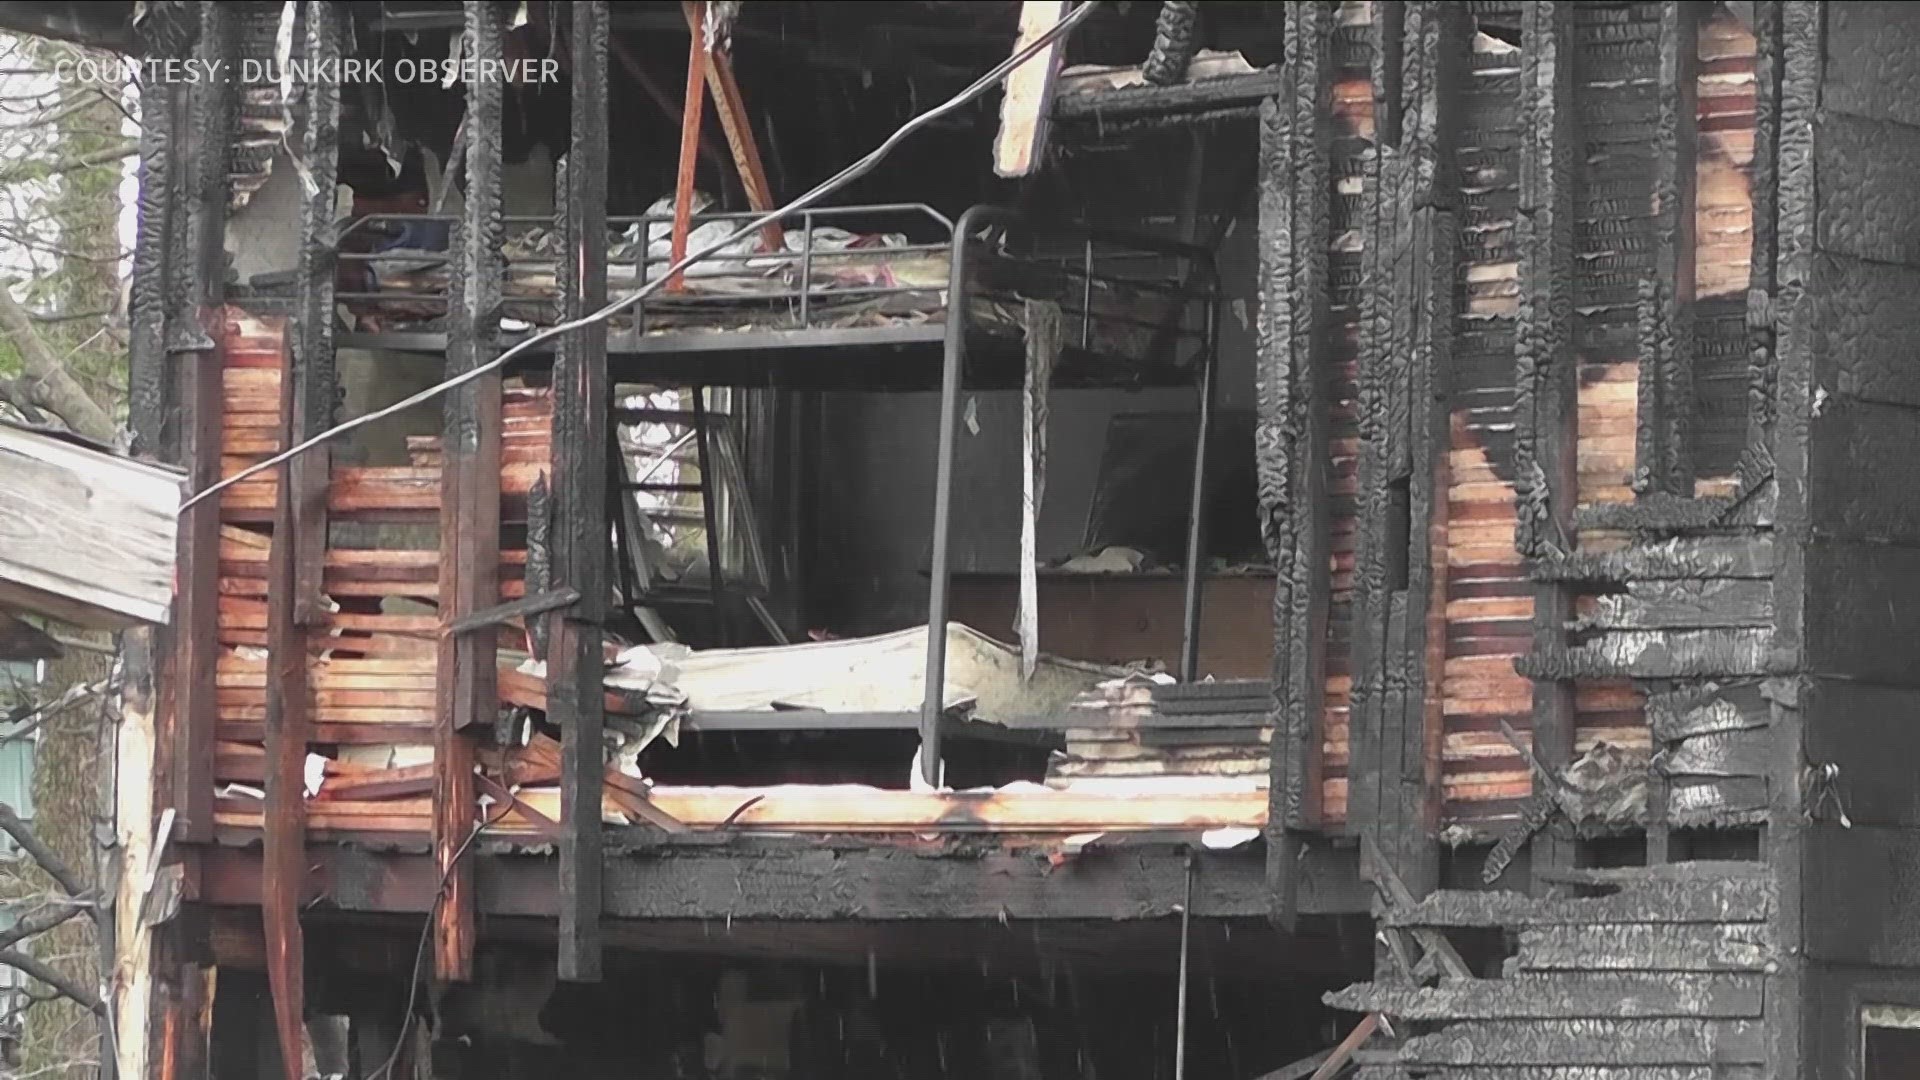 The fire spread to other buildings but the cause is still undetermined.